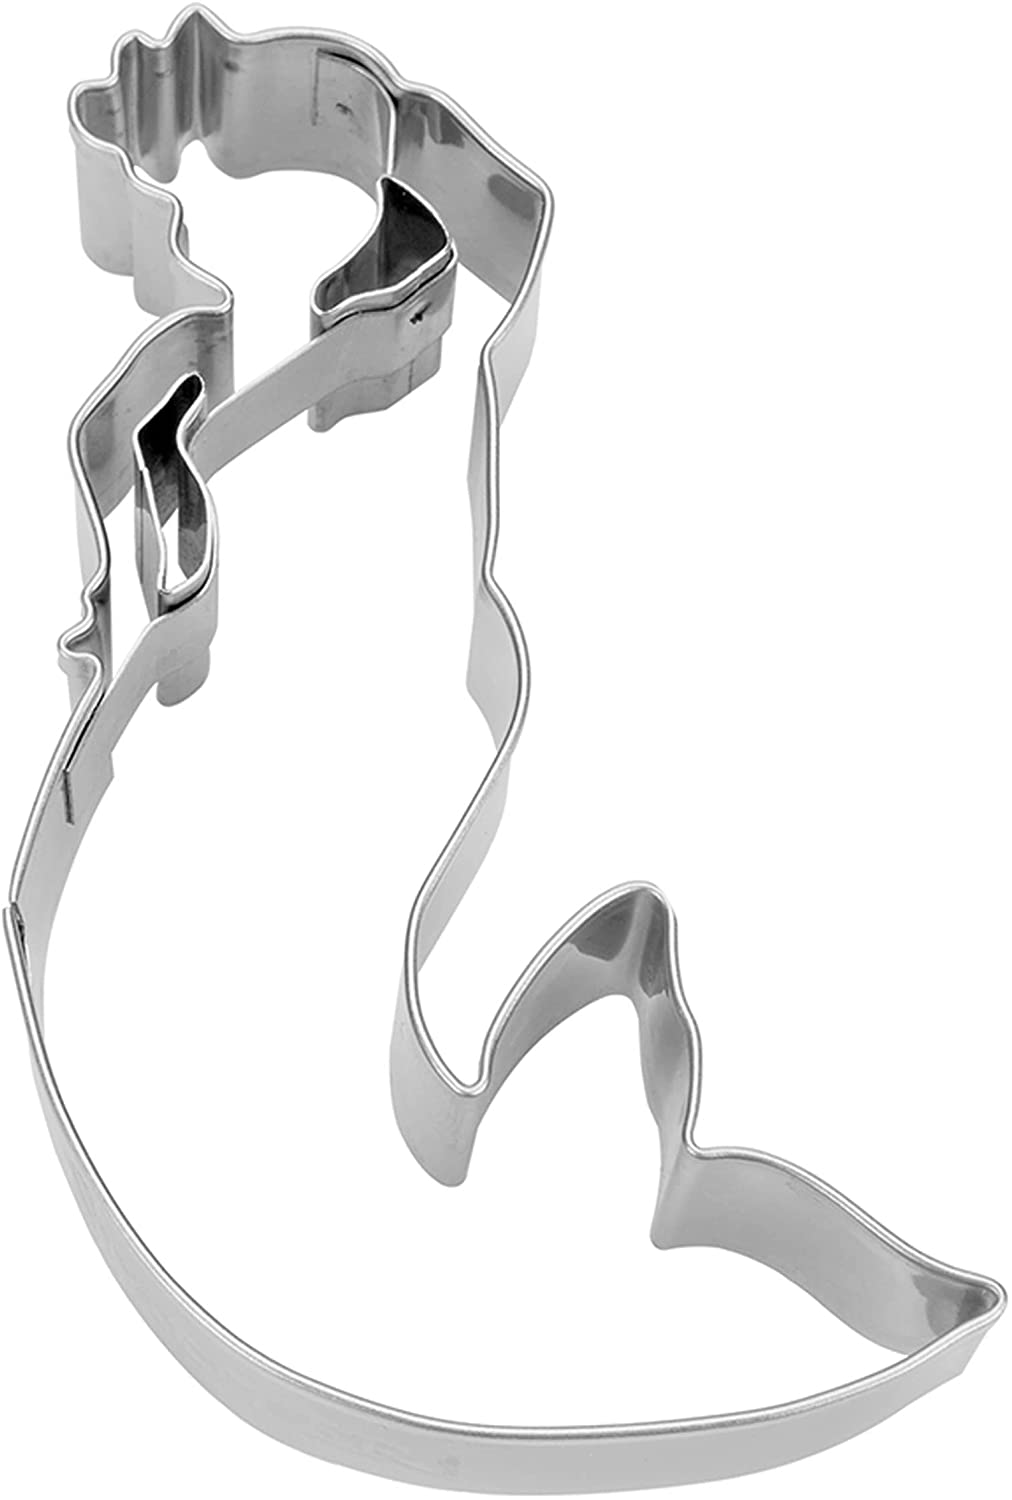 Staedter Städter Mermaid Approx. 9.5 cm Stainless Steel Silver, 9.5 x 5 x 1 cm